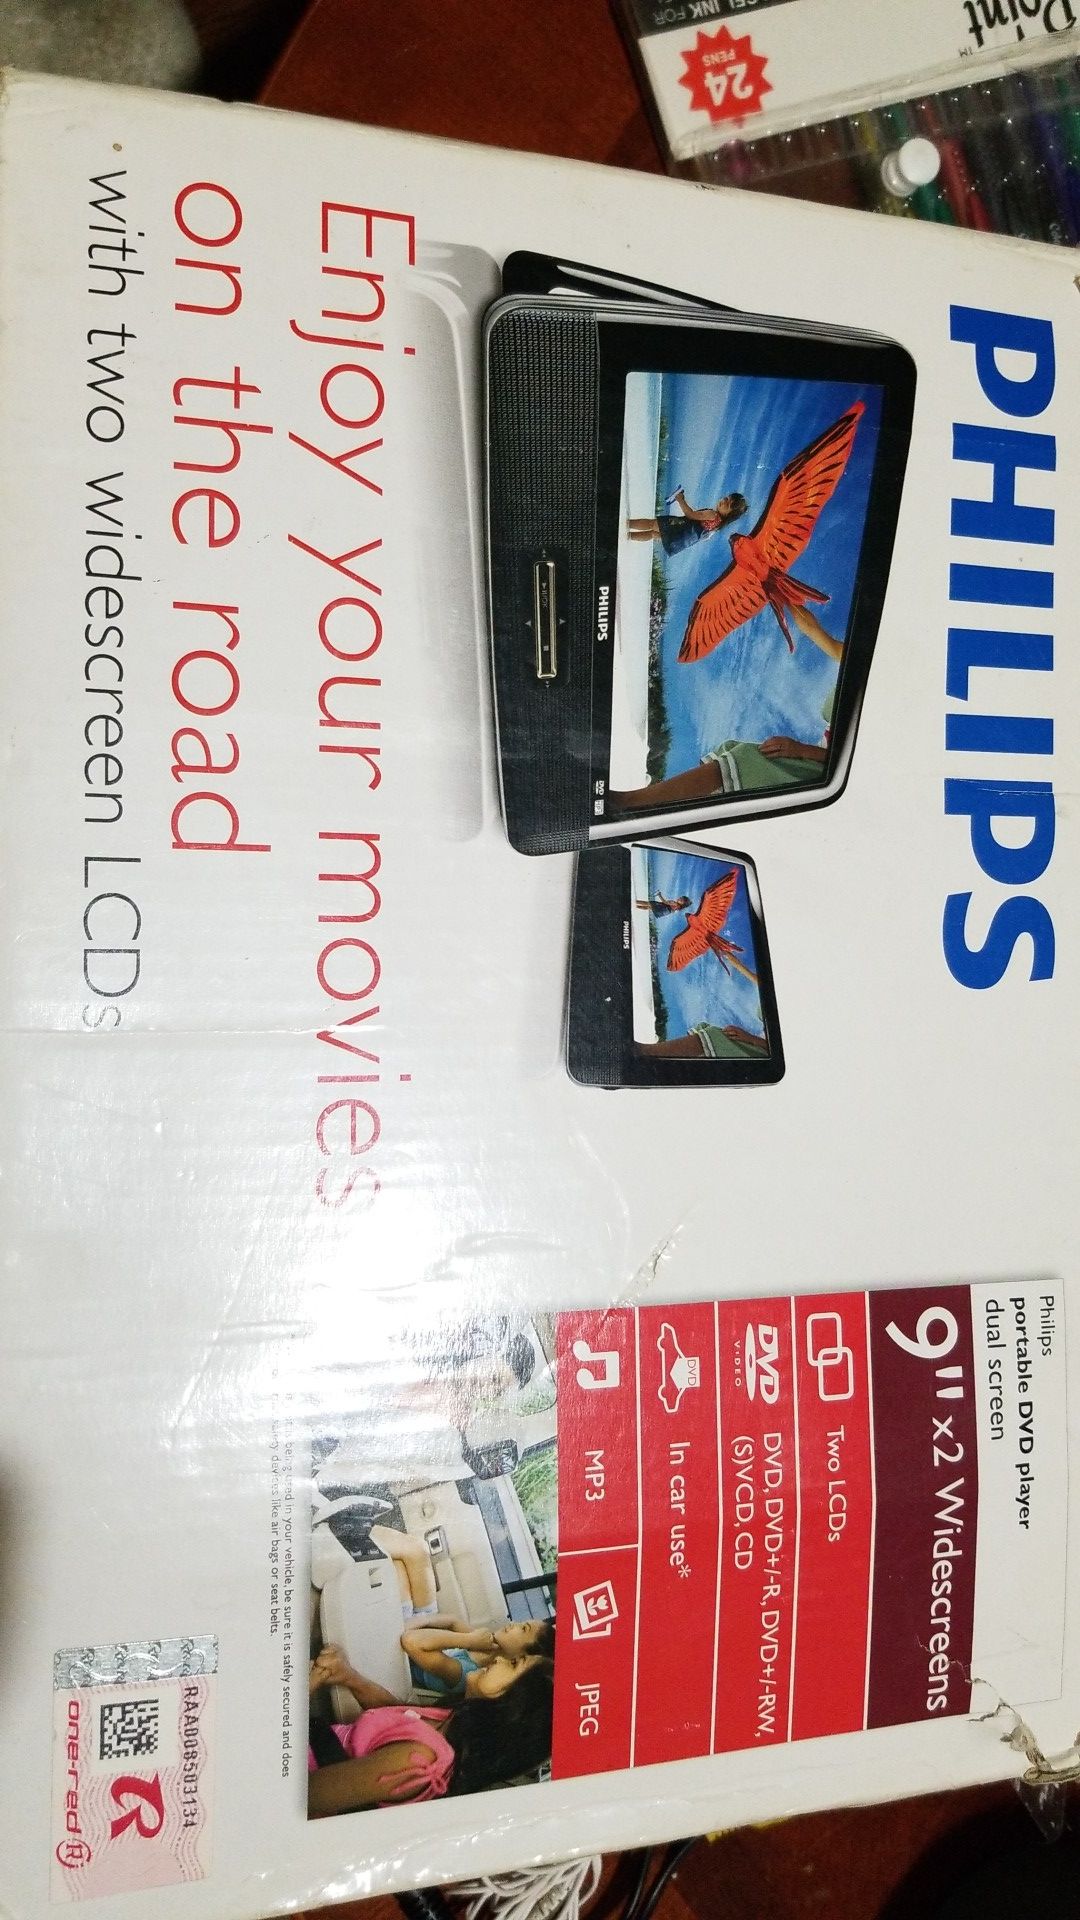 PHILIPS Dual 9" PORTABLE DVD PLAYERS×2